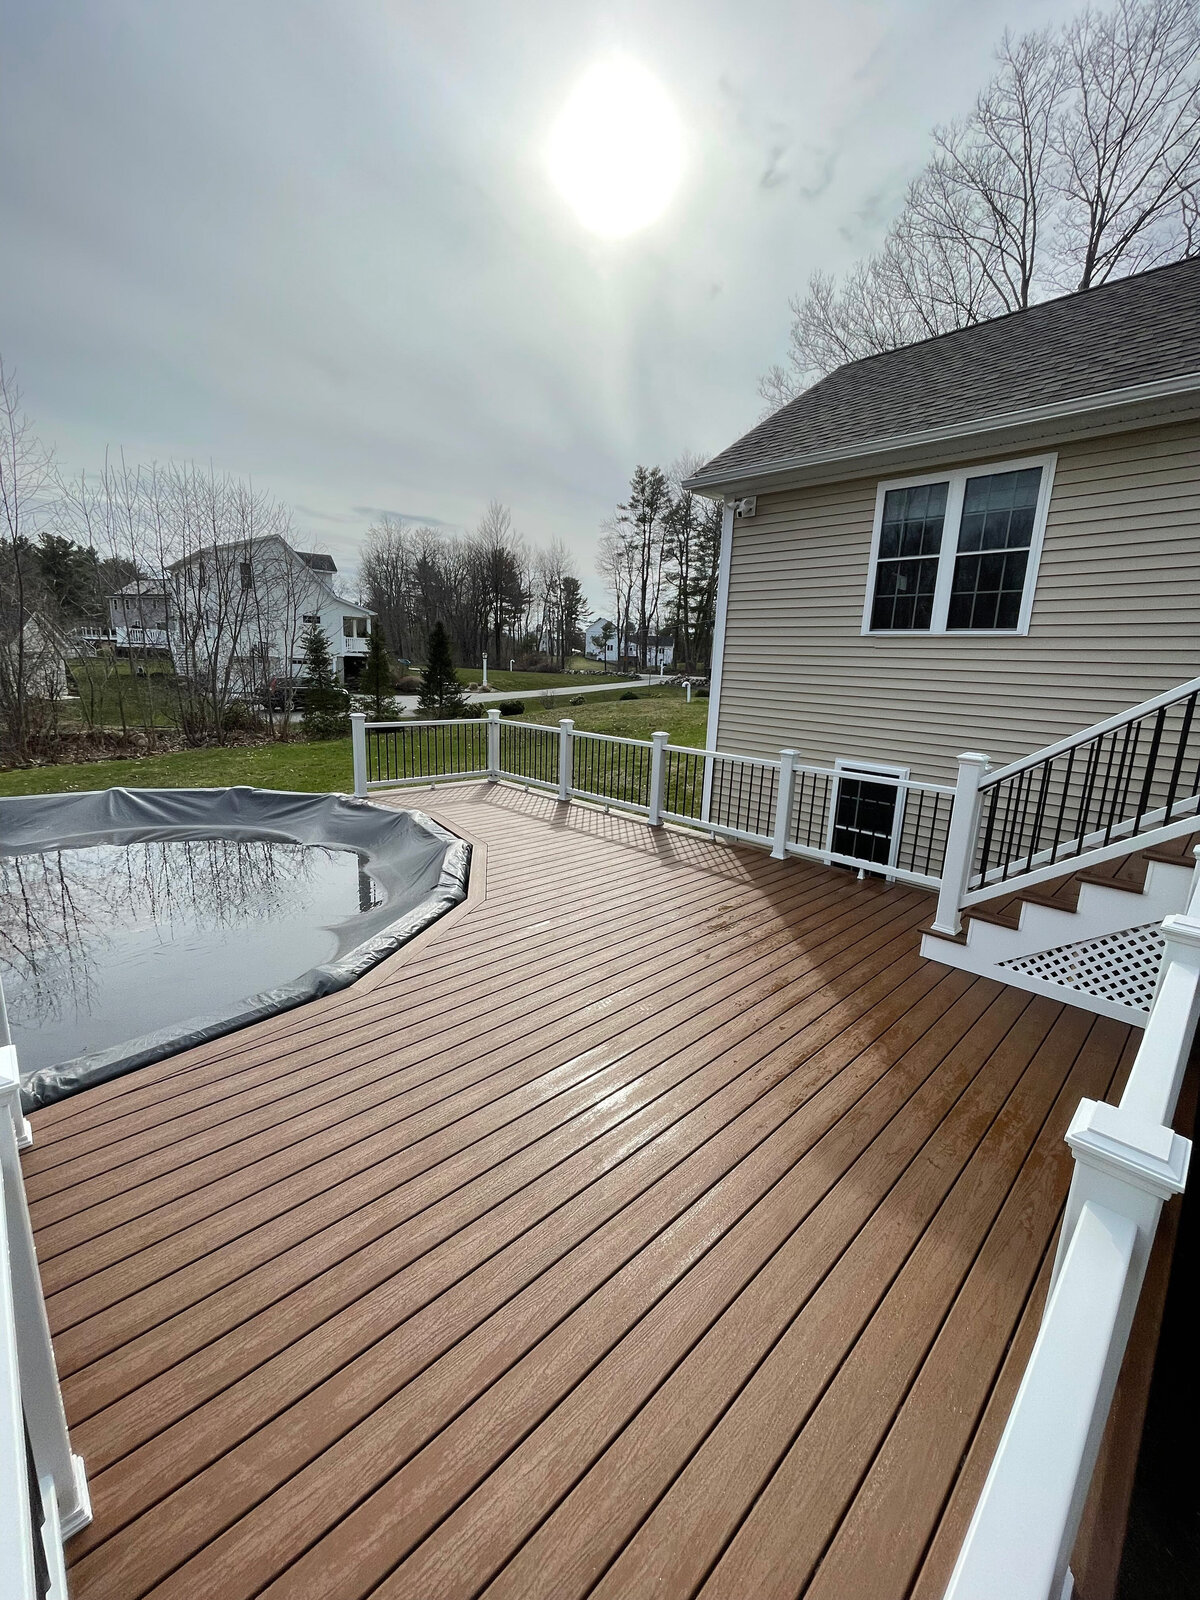 A beautiful dark brown deck with white railings and trellis stairs facing around a pool done by a Leominster MA Deck Contractor